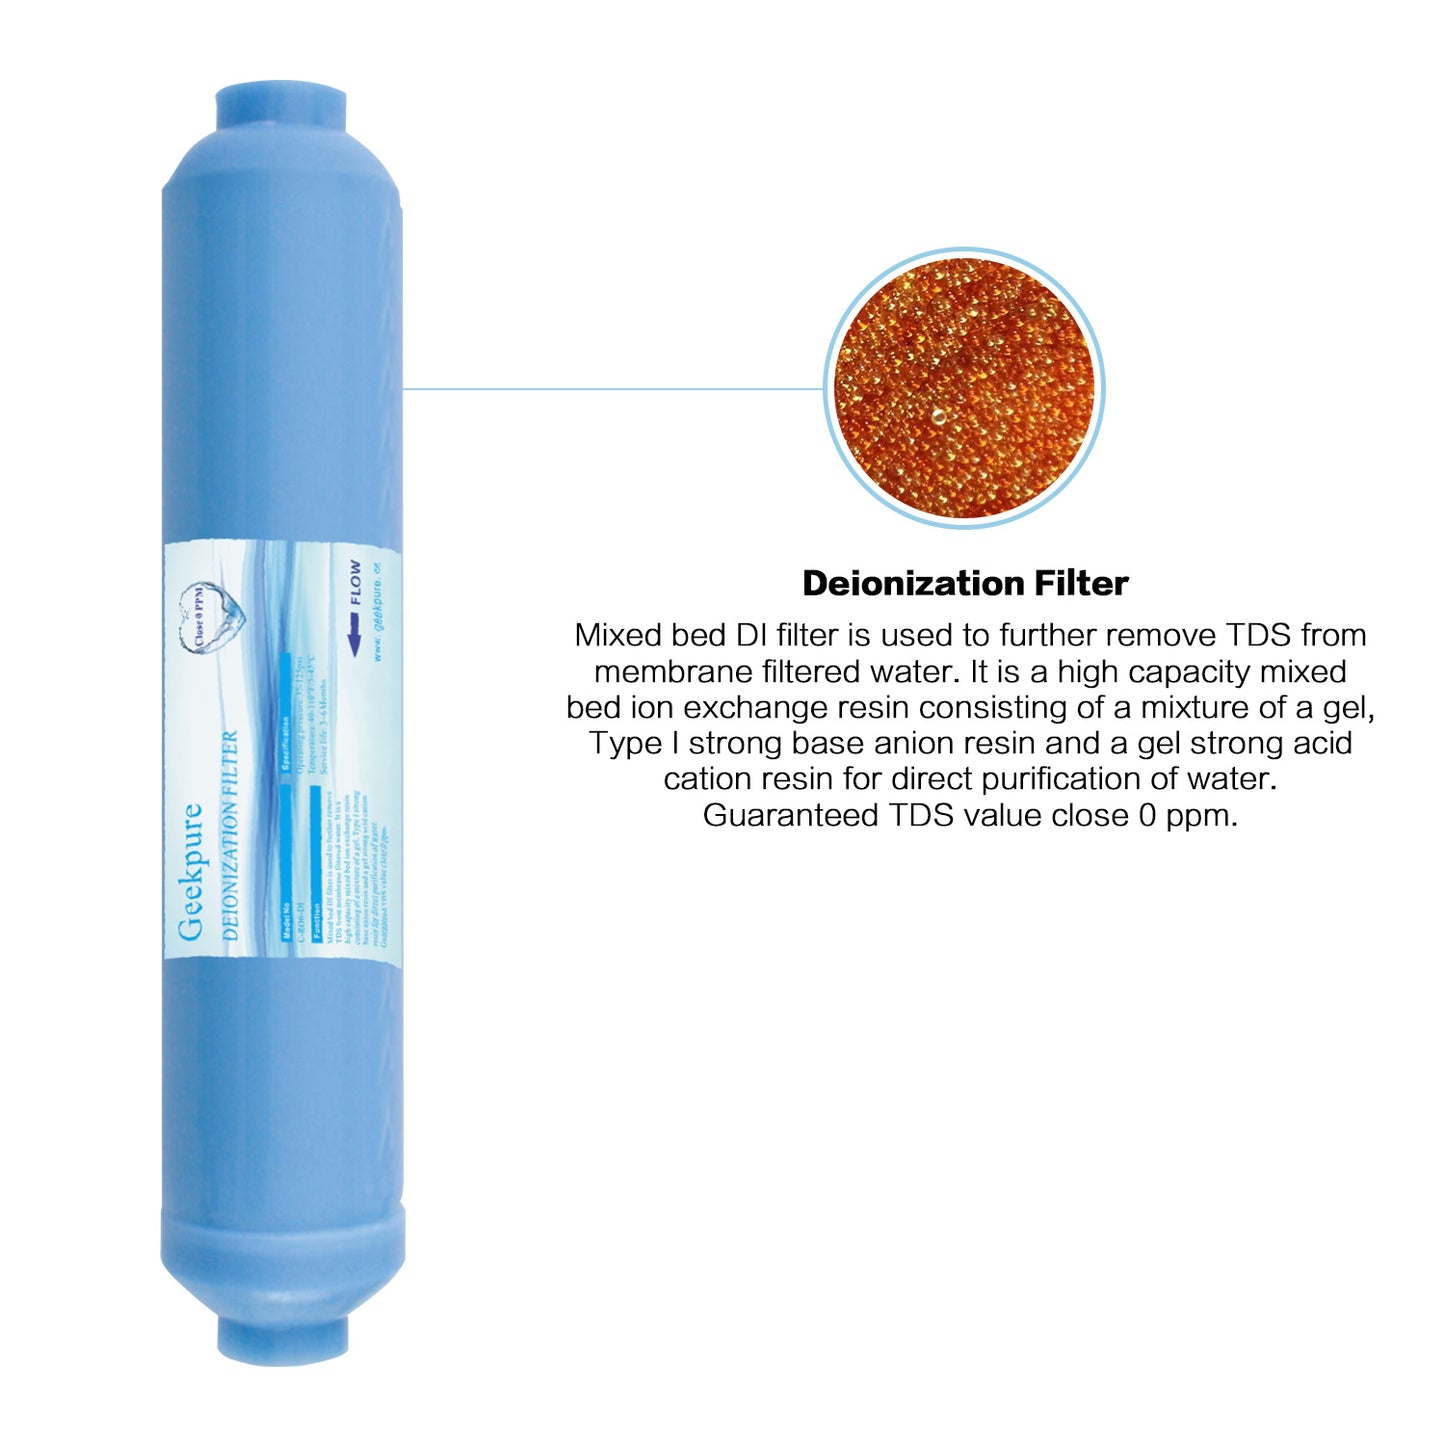 6th Stage Replacement Deionization DI Filter for Ro System TDS Close 0 -2" X 10"